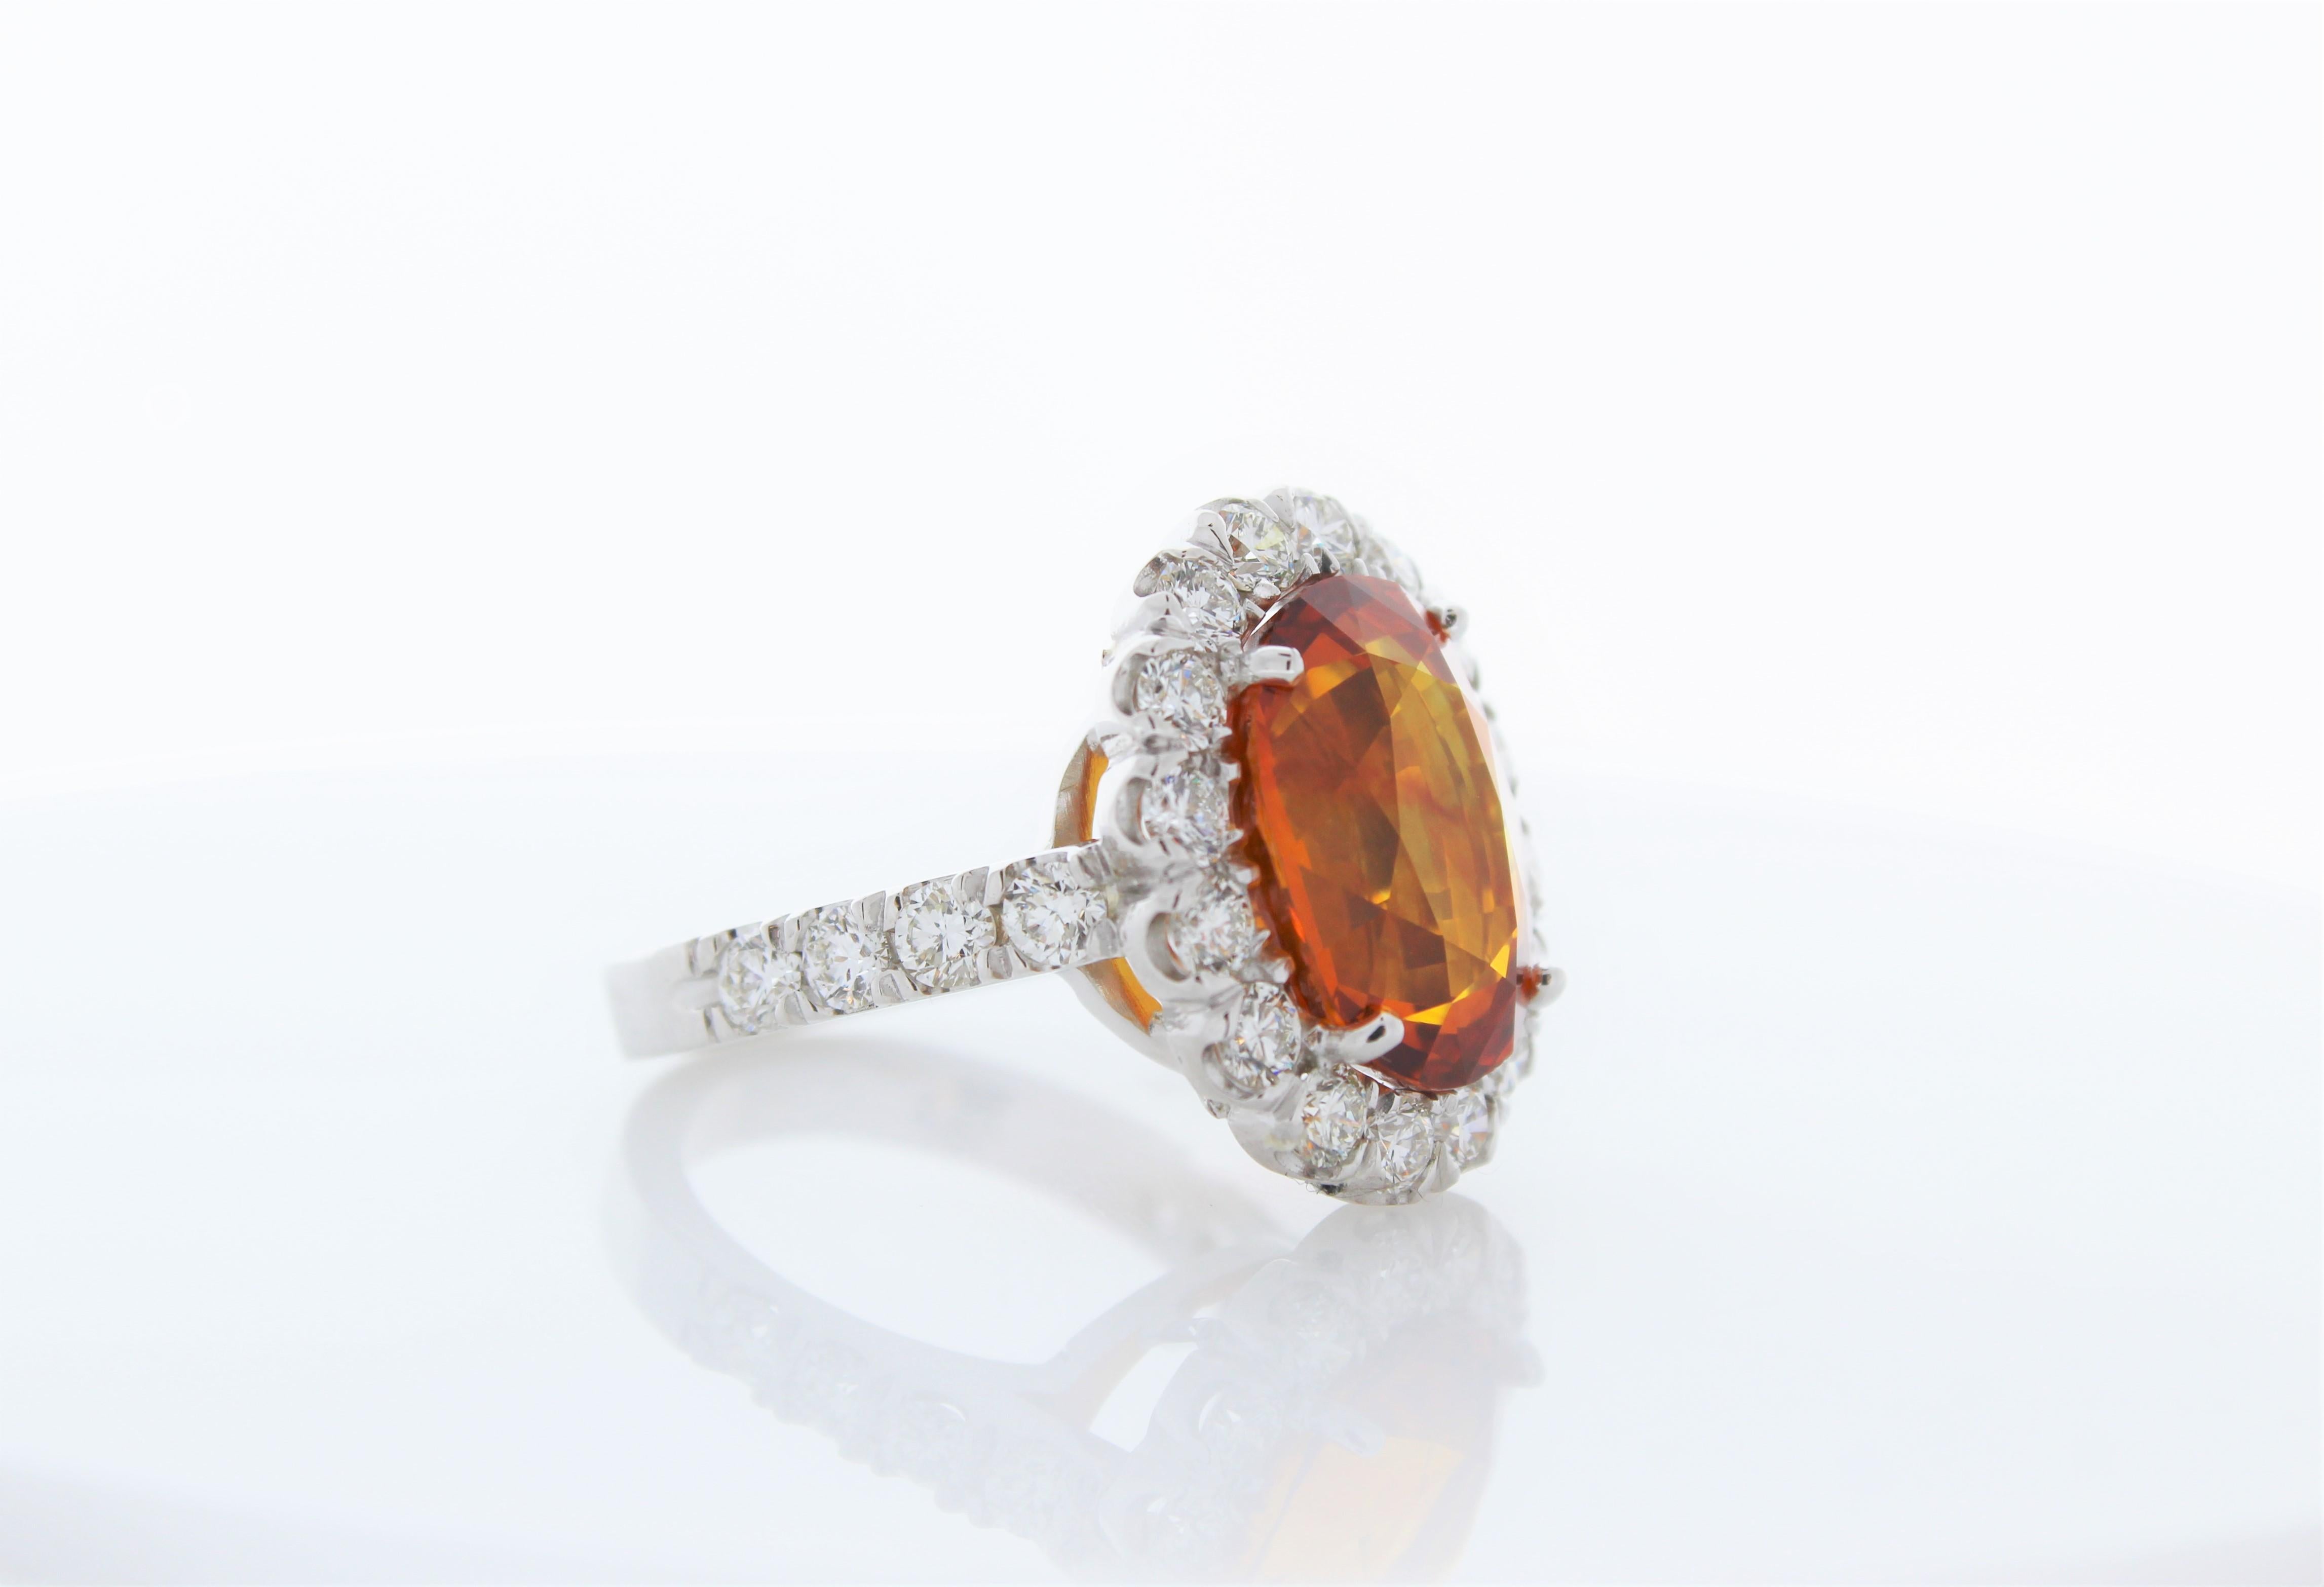 Majestic and elegant, this stunning fashion gemstone ring is spectacular from start to finish. It features a richly saturated orangey 10.47 carat. The size of this orange sapphire is the stunner of the ring. A dazzling array of 1.98 carat round